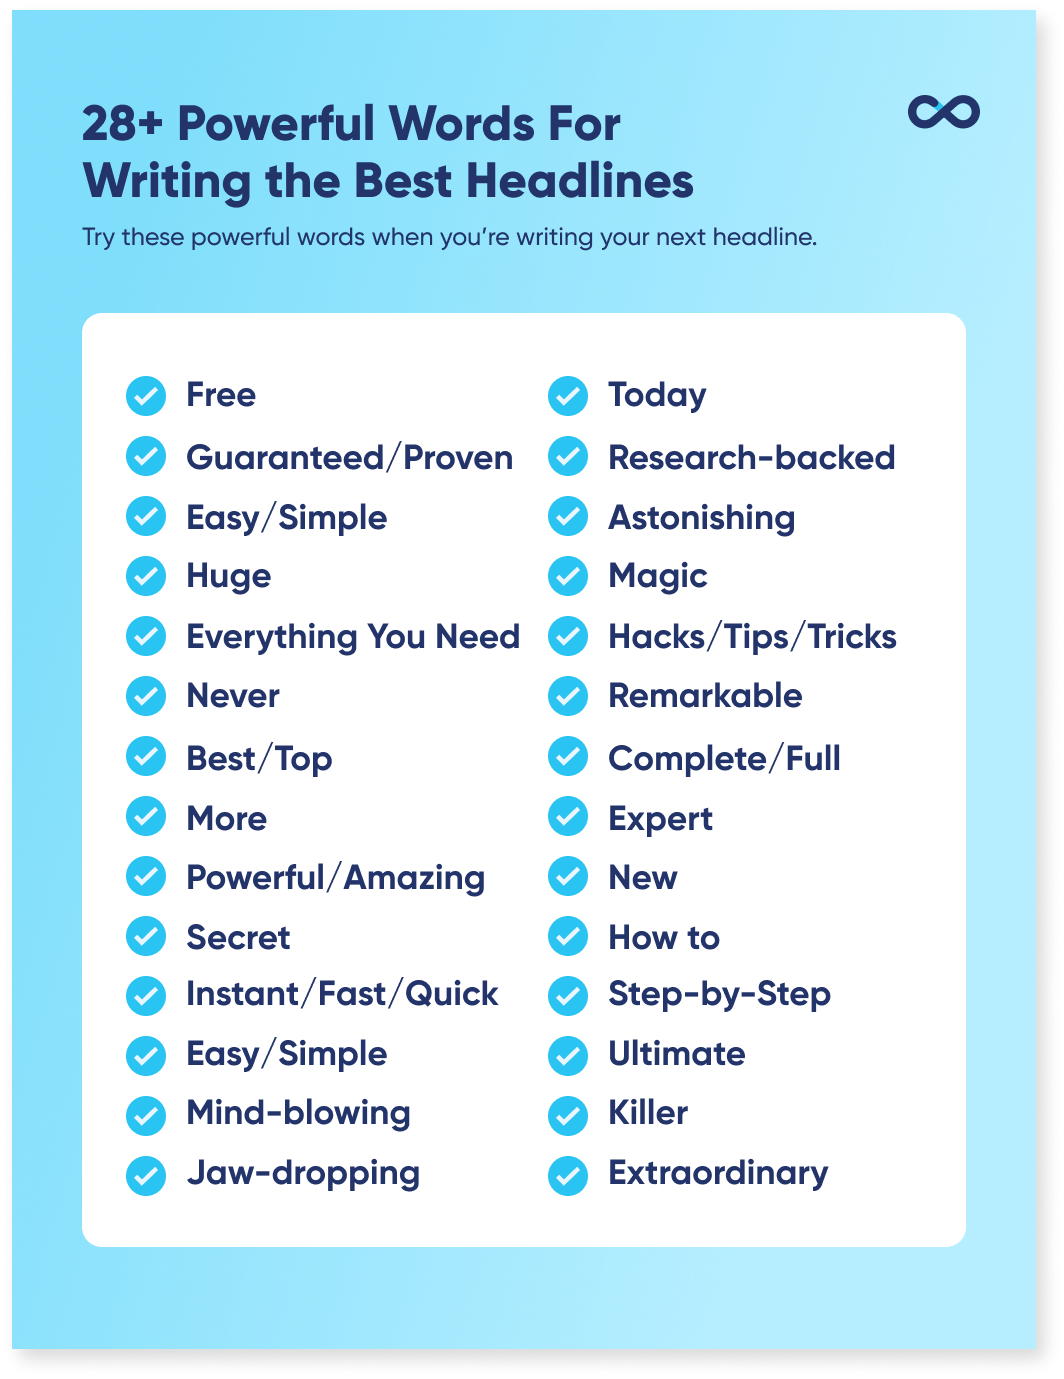 A list of powerful words for writing headlines